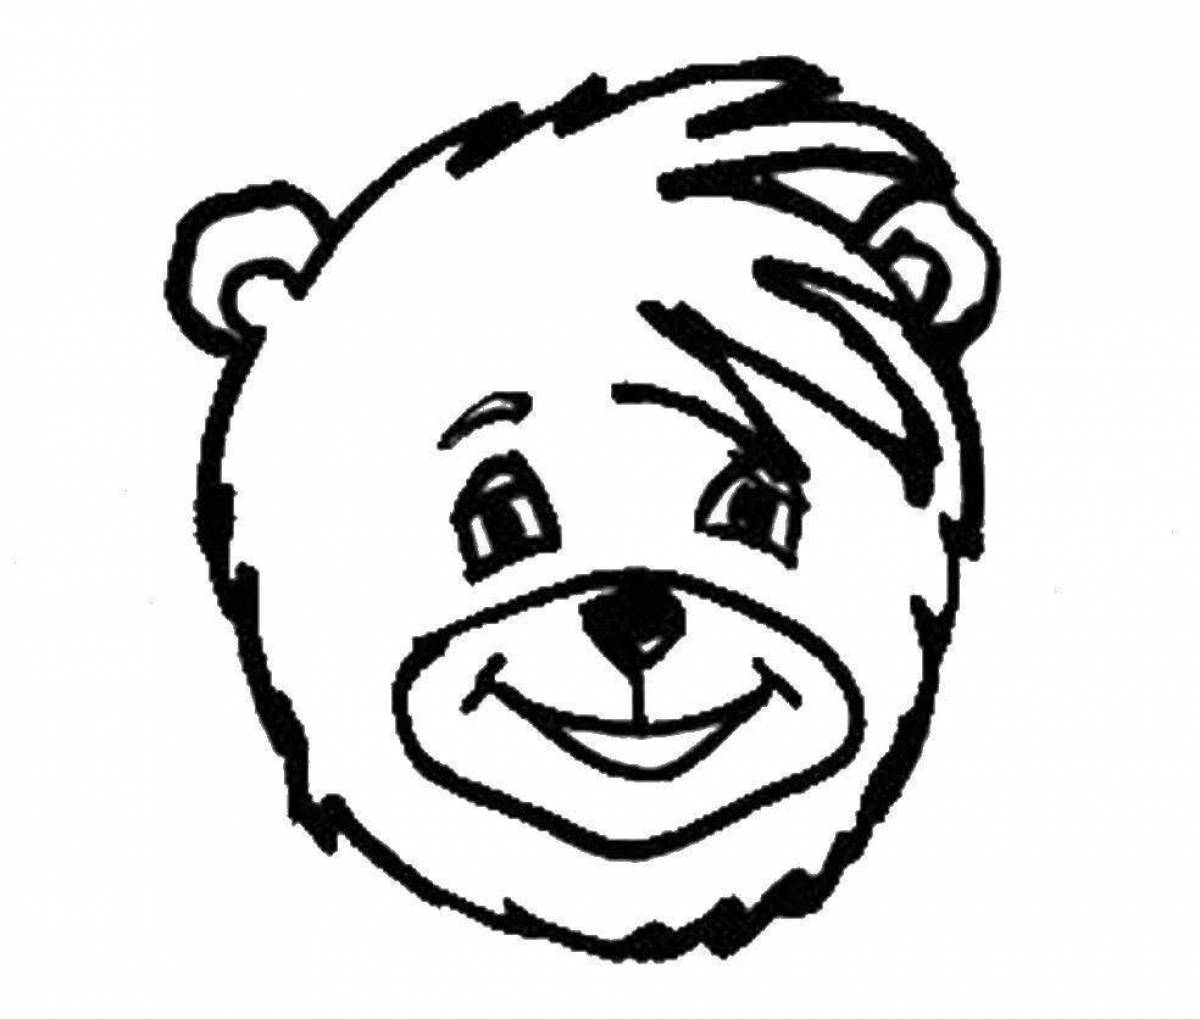 Amazing bear head coloring page